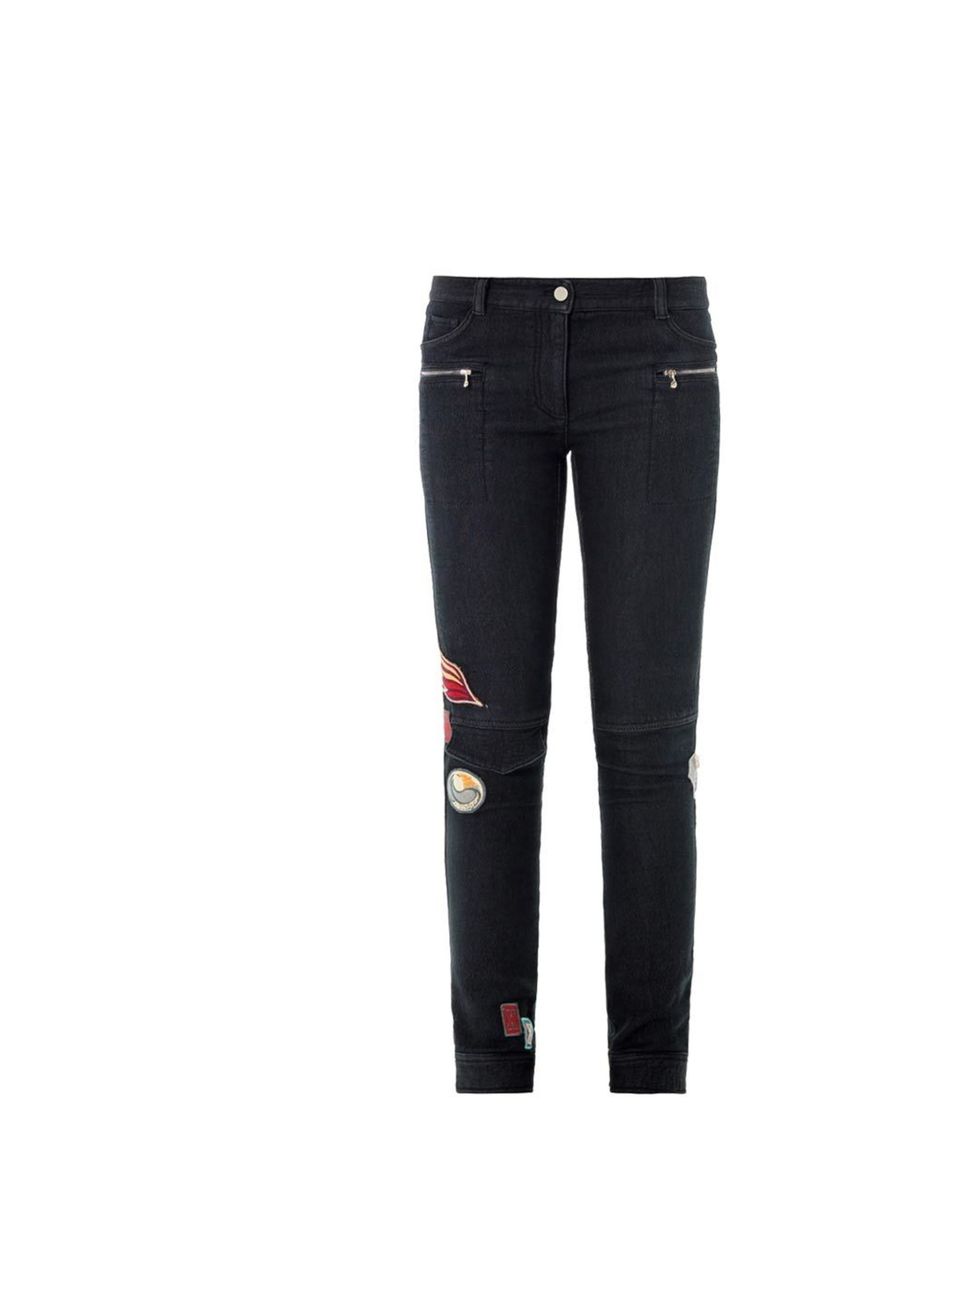 <p>Swap tried and trusted denim for 3.1 Phillip Lim's badge embellished jeans, £315, at <a href="http://www.matchesfashion.com/product/166457?qxjkl=tsid:30065%7Ccat:0RpXOIXA500">Matches Fashion</a></p>